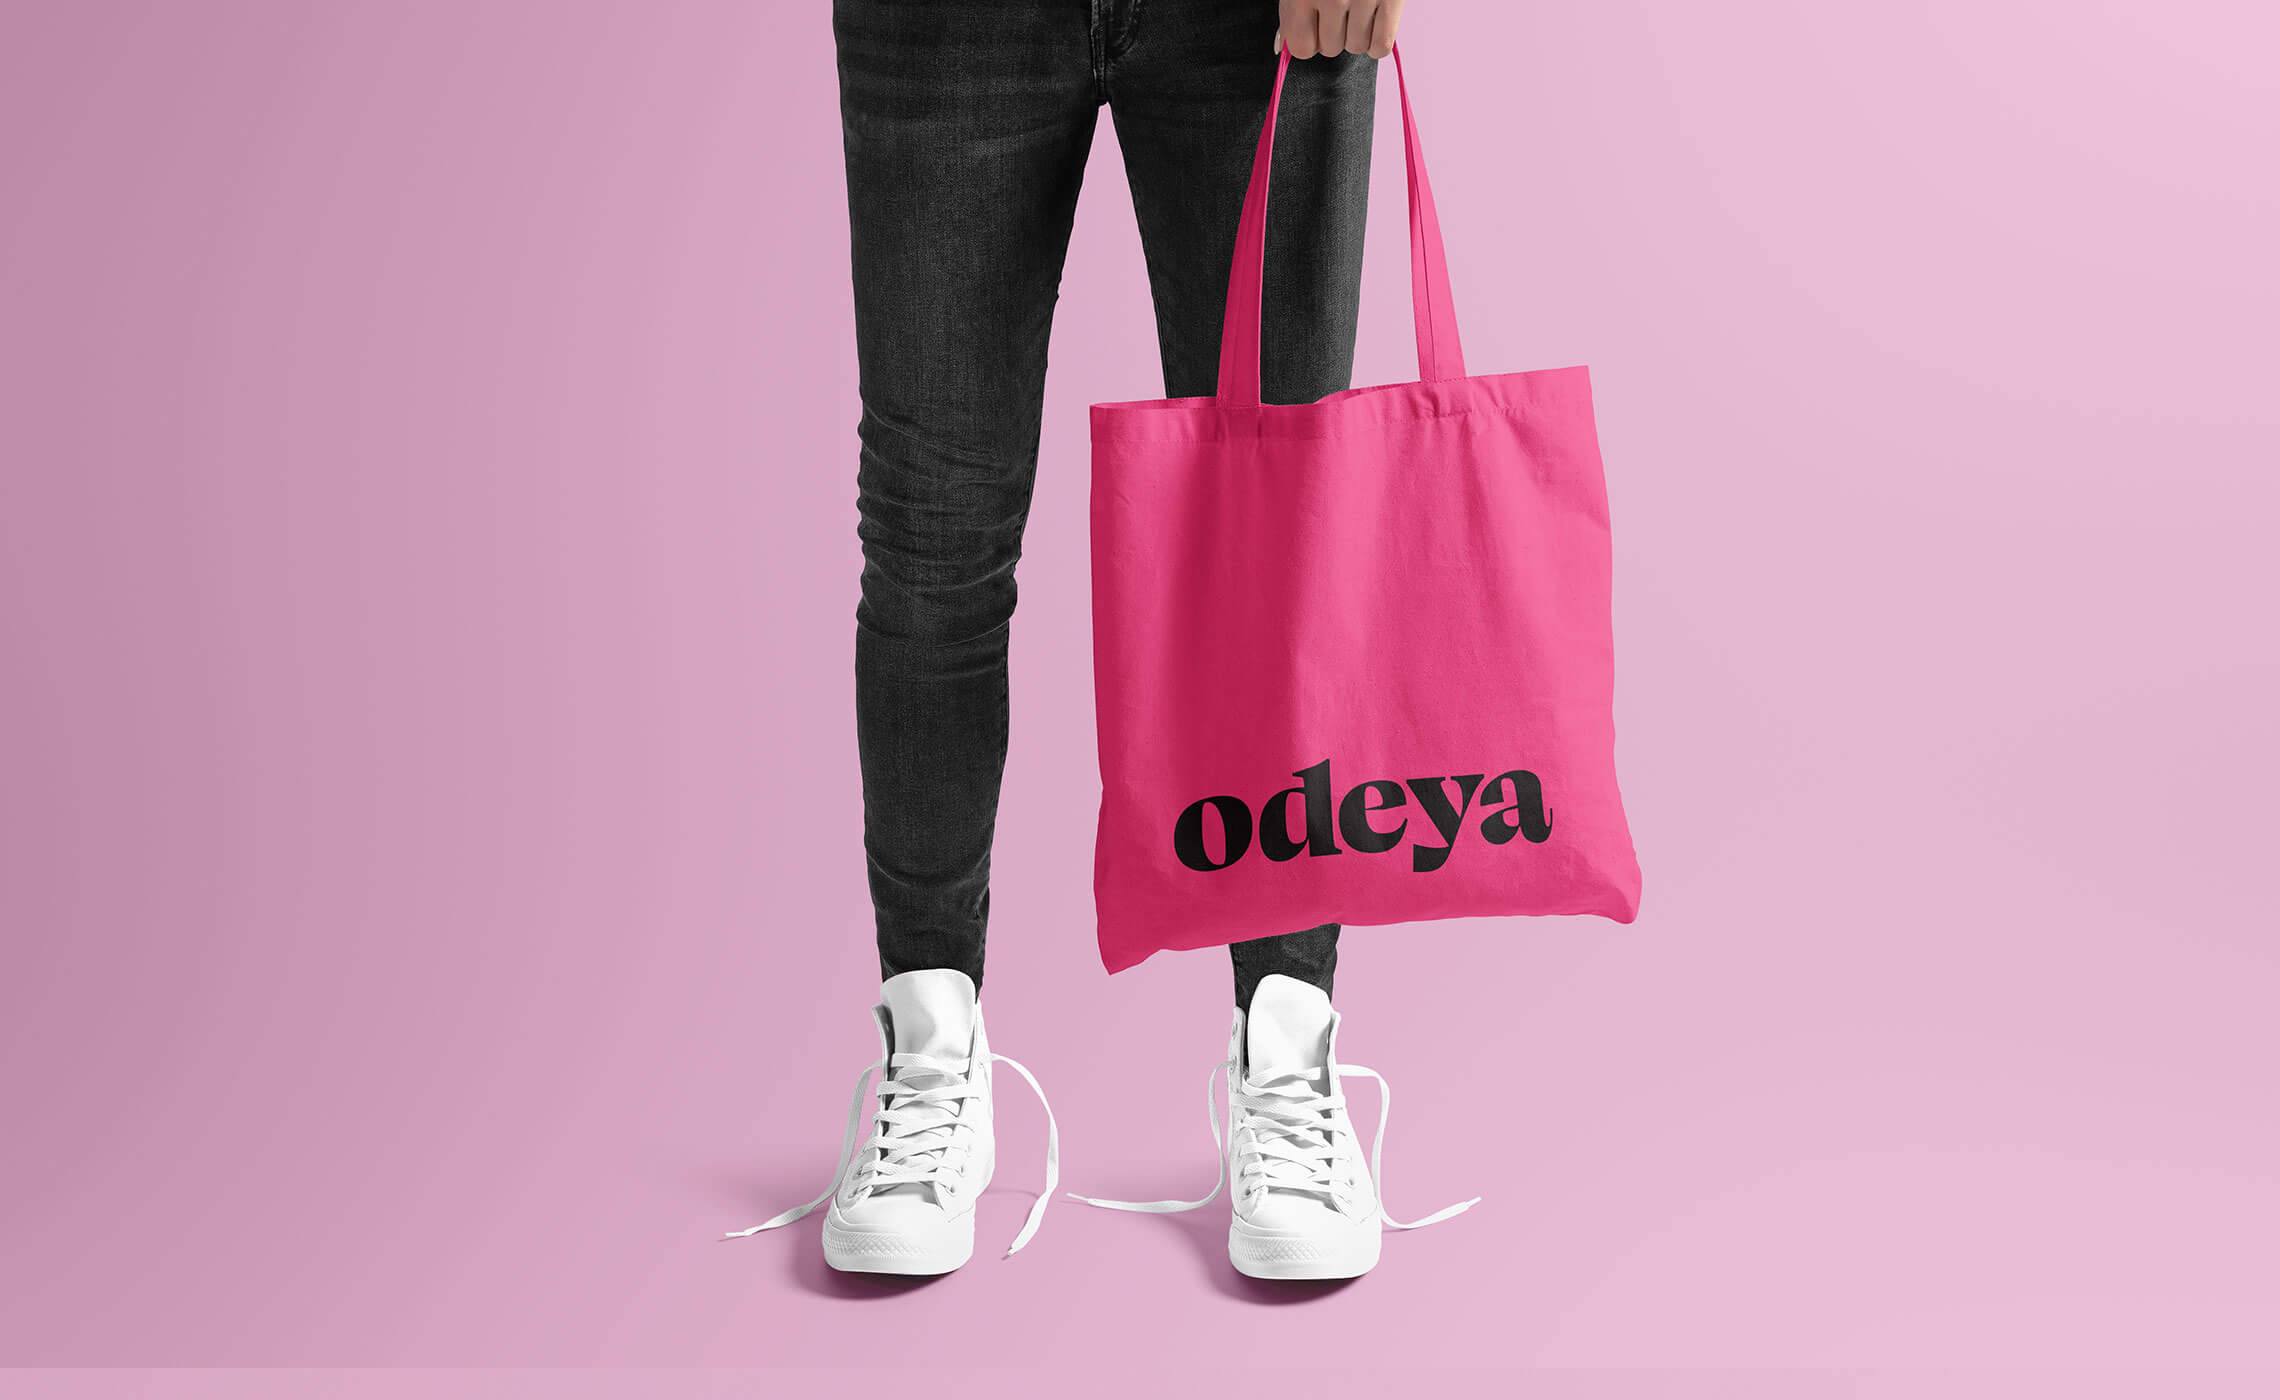 Branding services including packaging design for a menstrual product brand, Odeya